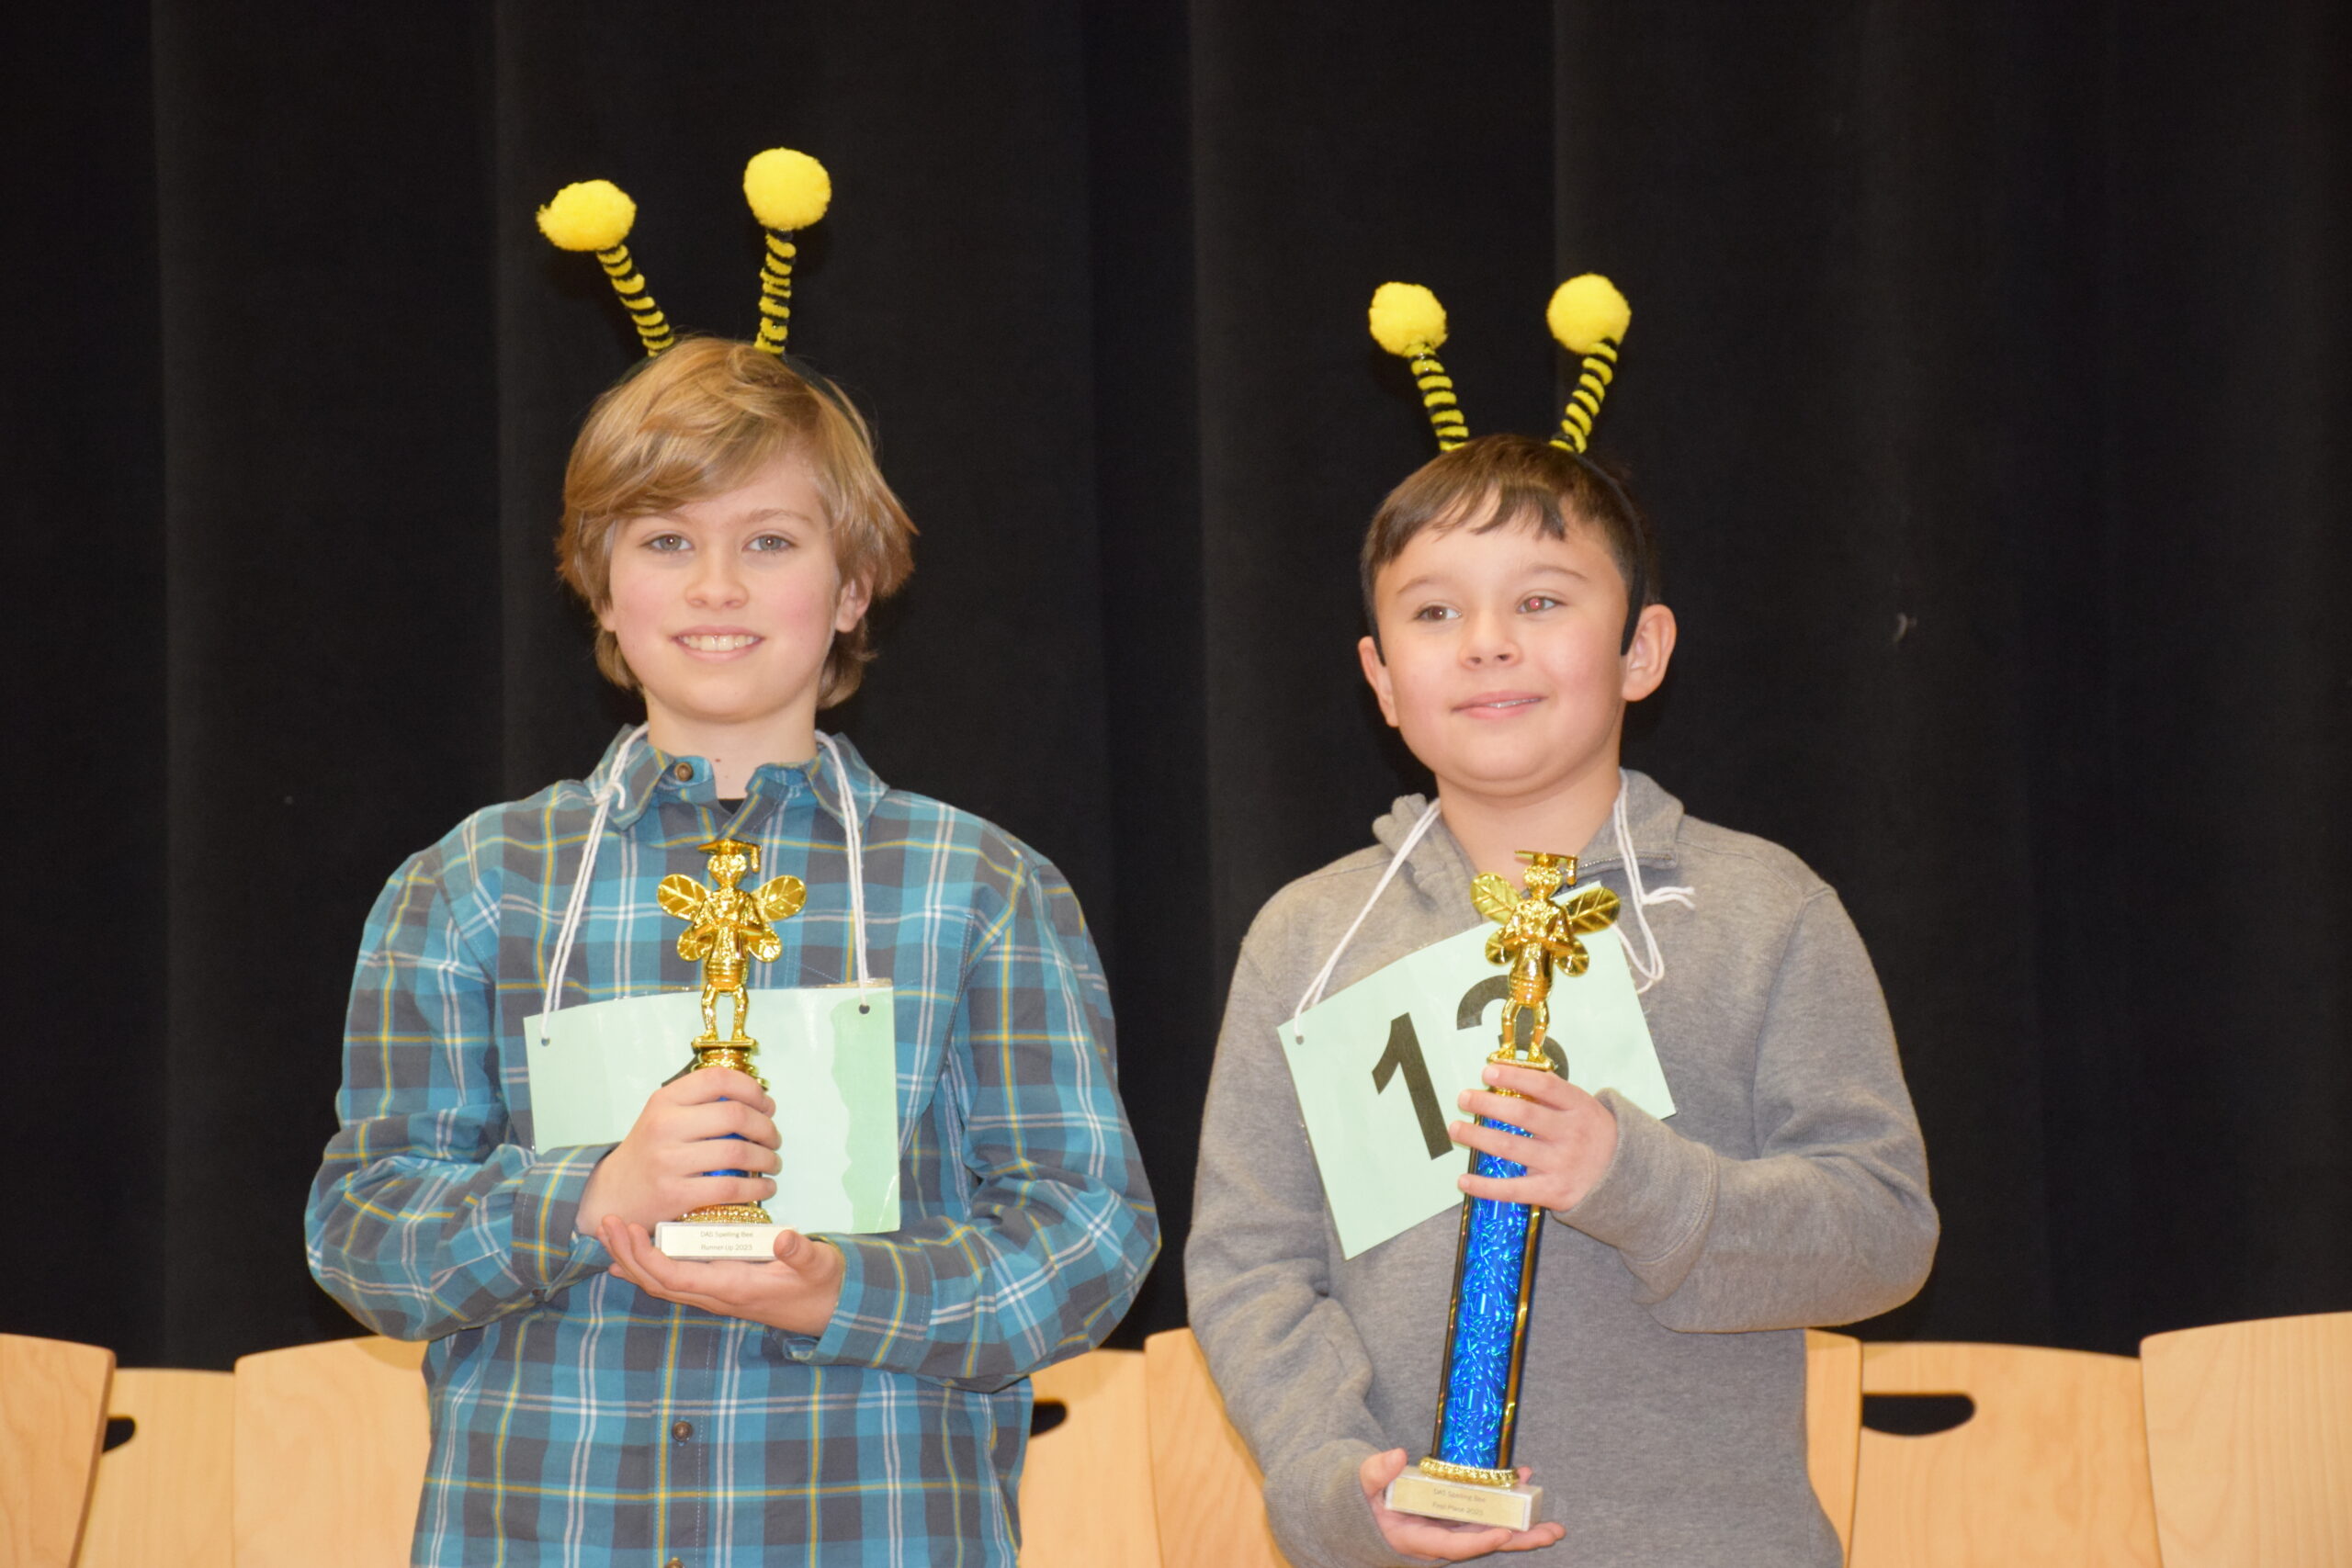 Dayton Avenue Elementary School third grade spelling bee runner-up Nathan Franco, left, and winner Enzo Pastor with their trophies. Enzo moves on to the regional competition. COURTESY EASTPORT-SOUTH MANOR SCHOOL DISTRICT